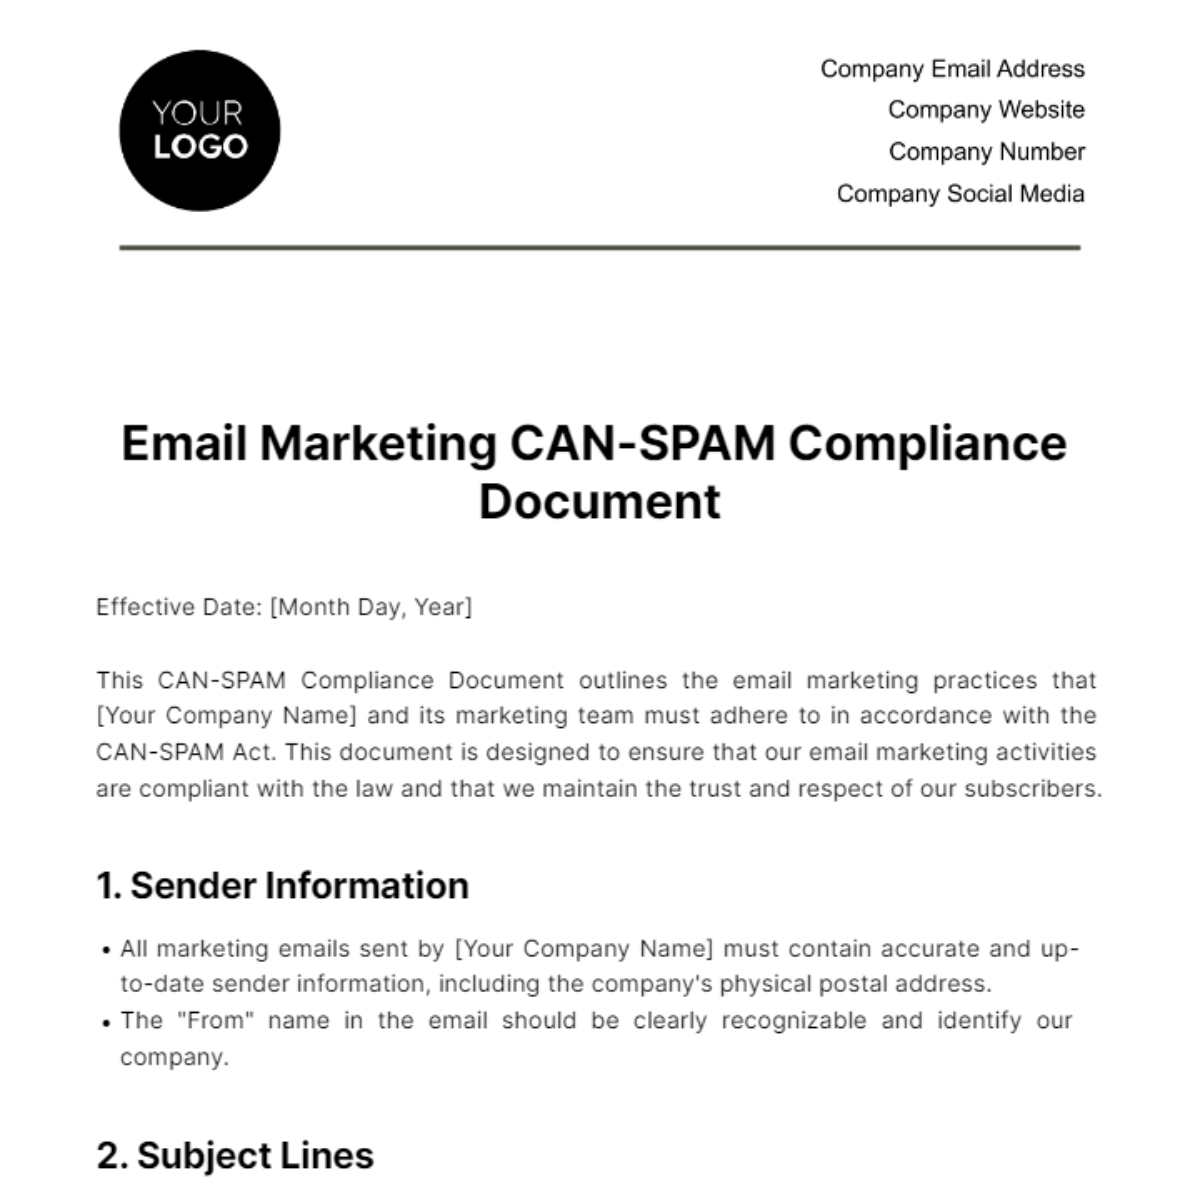 Free Email Marketing CAN-SPAM Compliance Document Template